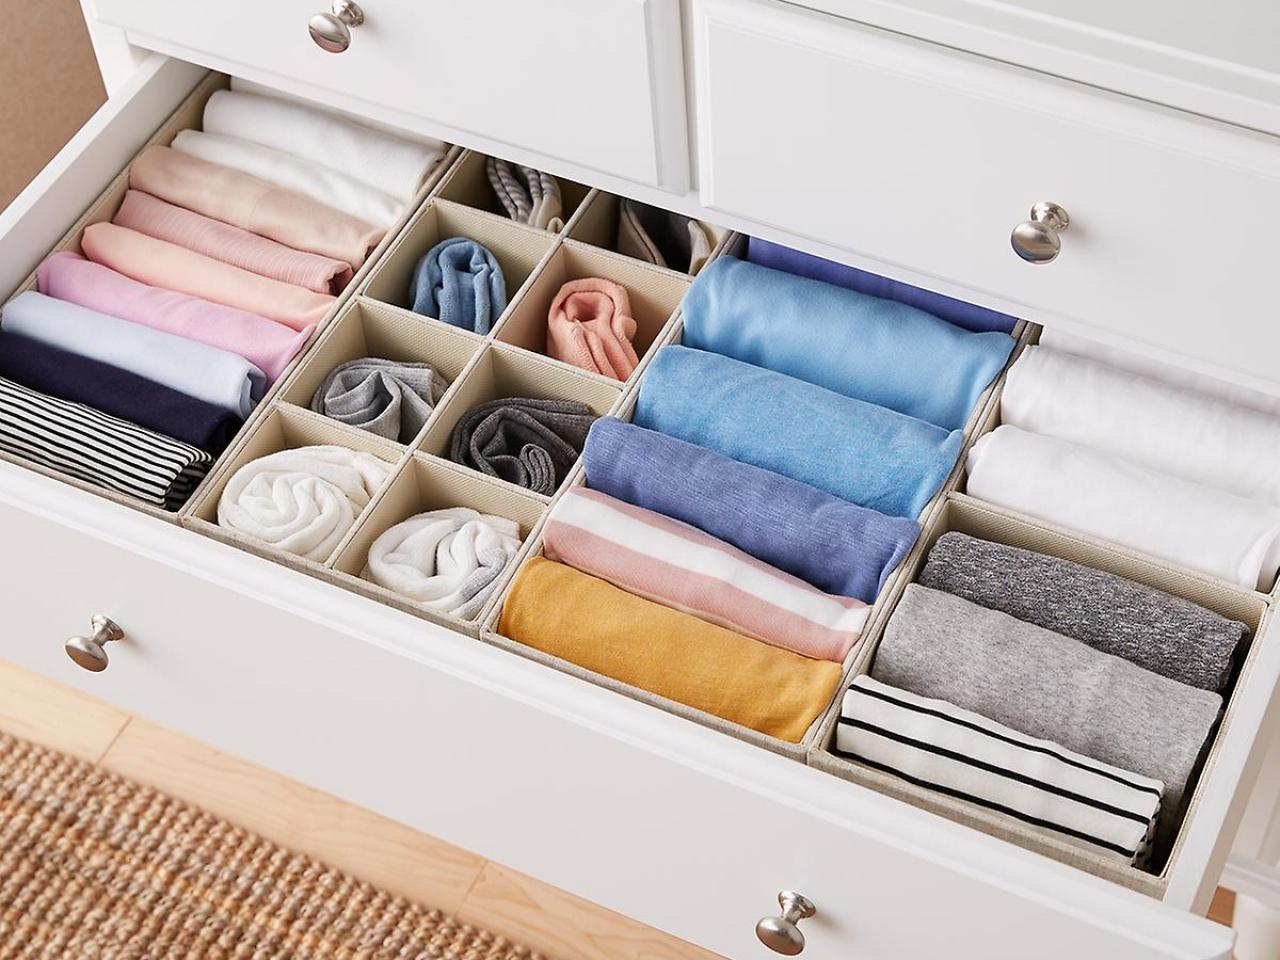 https://hgtvhome.sndimg.com/content/dam/images/hgtv/products/2021/2/16/3/RX_The-Container-Store_Linen-Drawer-Organizers.jpg.rend.hgtvcom.1280.960.suffix/1613665948800.jpeg